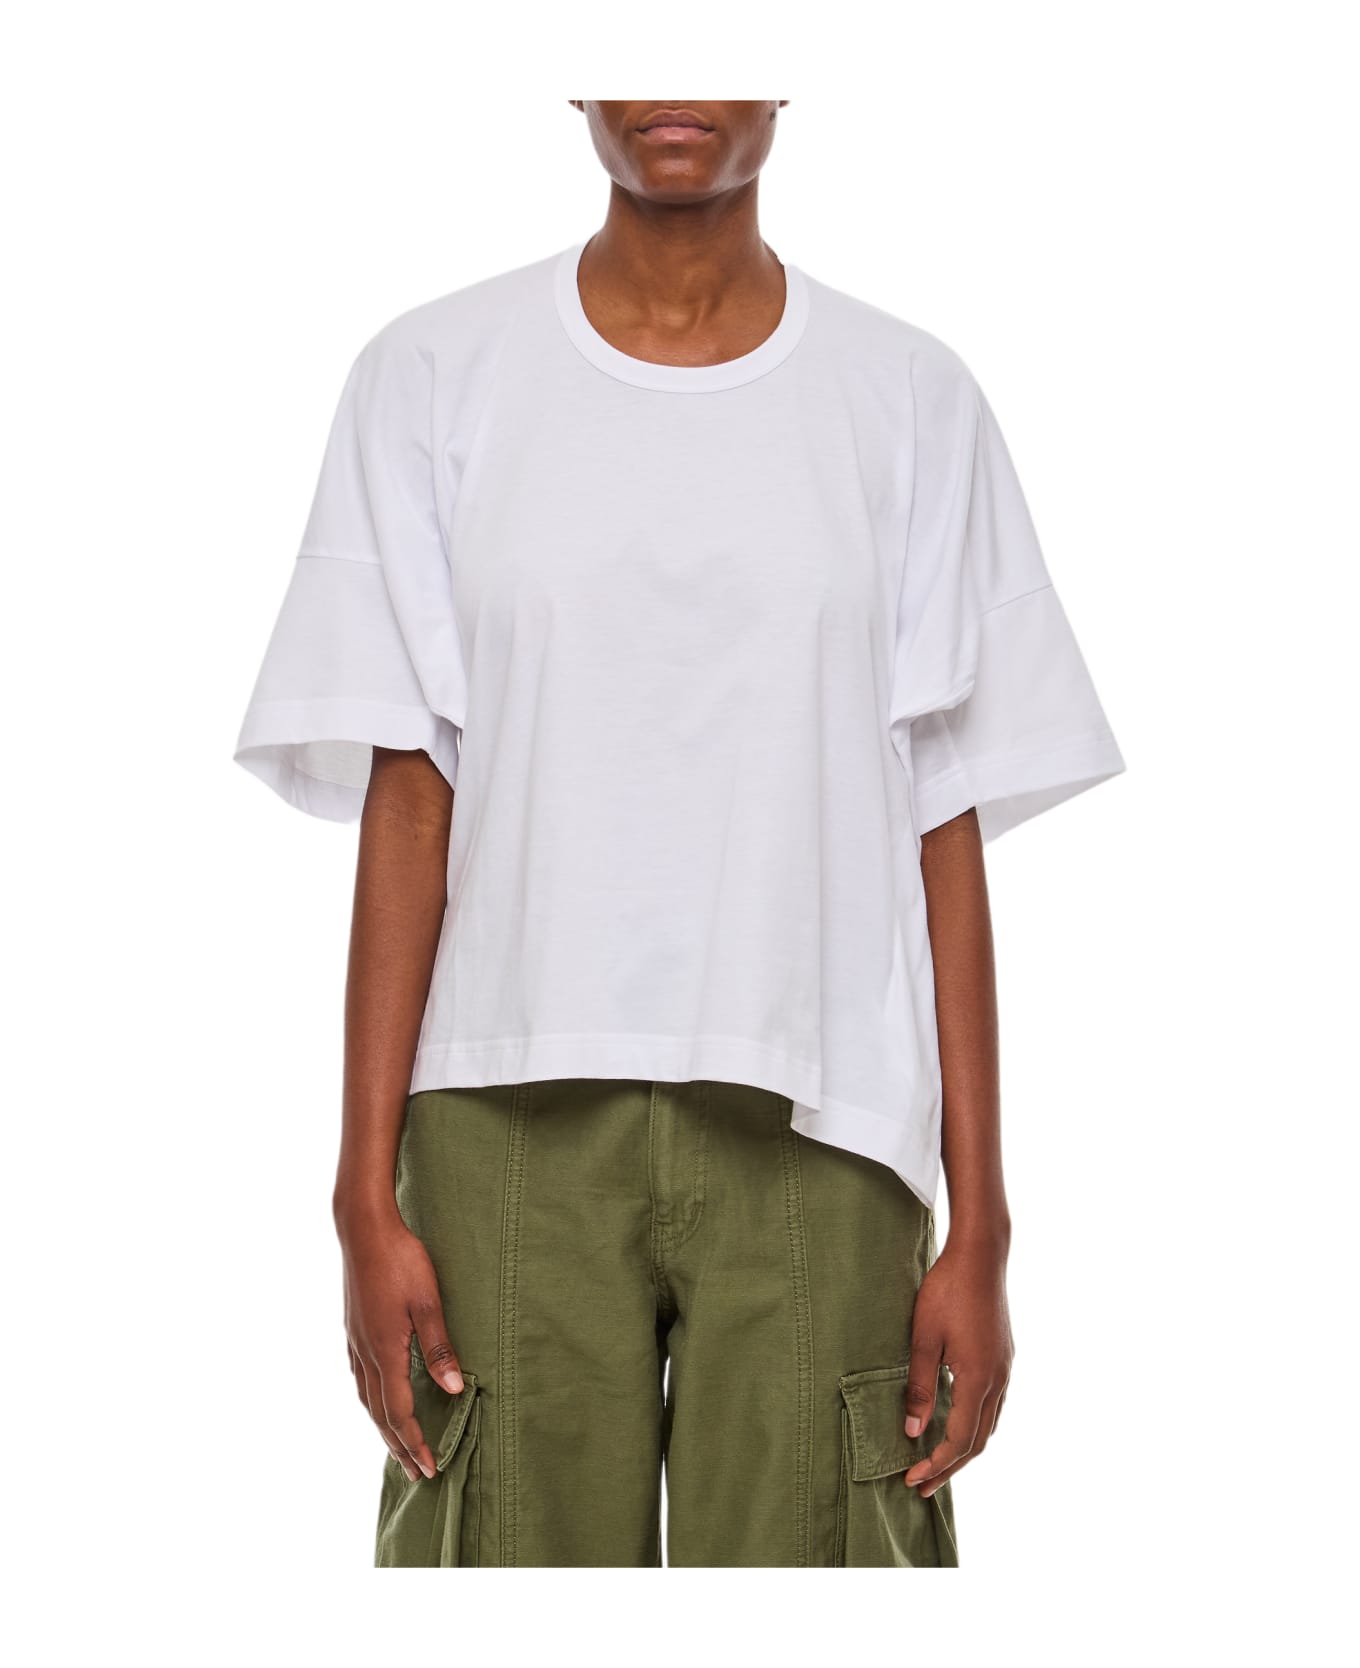 Plan C Relaxed Fit Jersey T-shirt